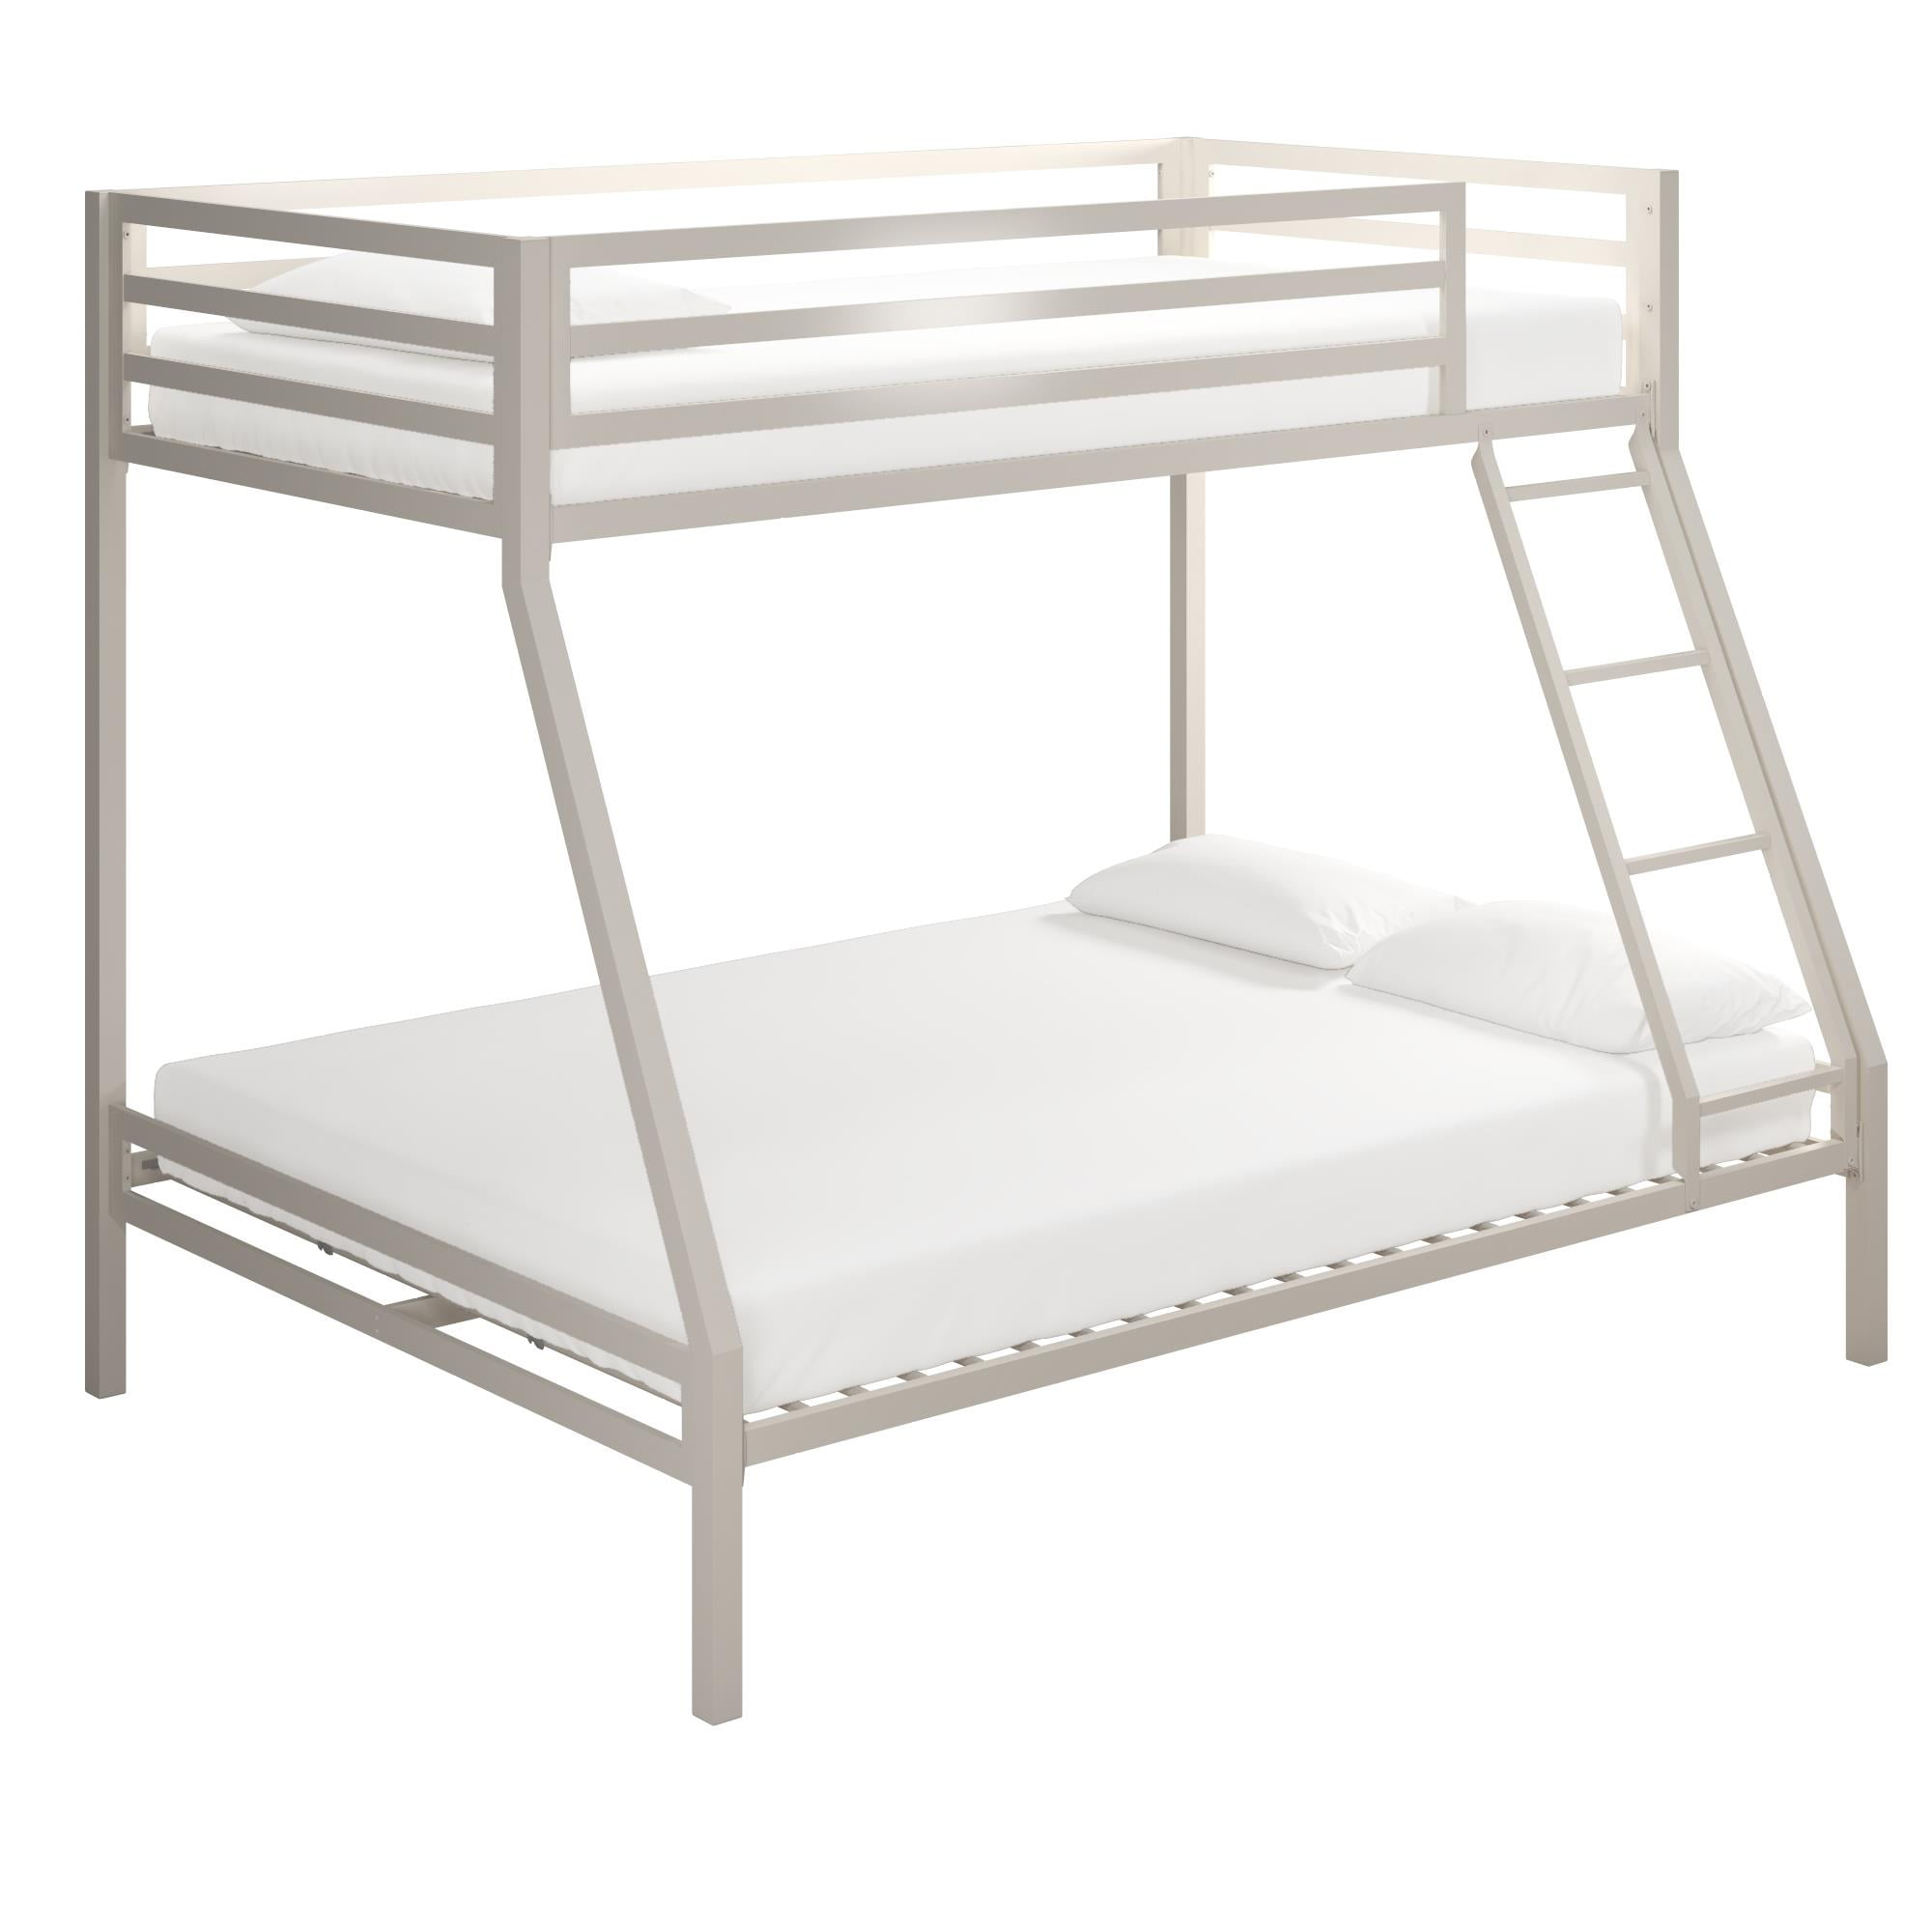 Mainstays Premium Twin Over Full Bunk Bed, Mainstays Bunk Bed Instructions